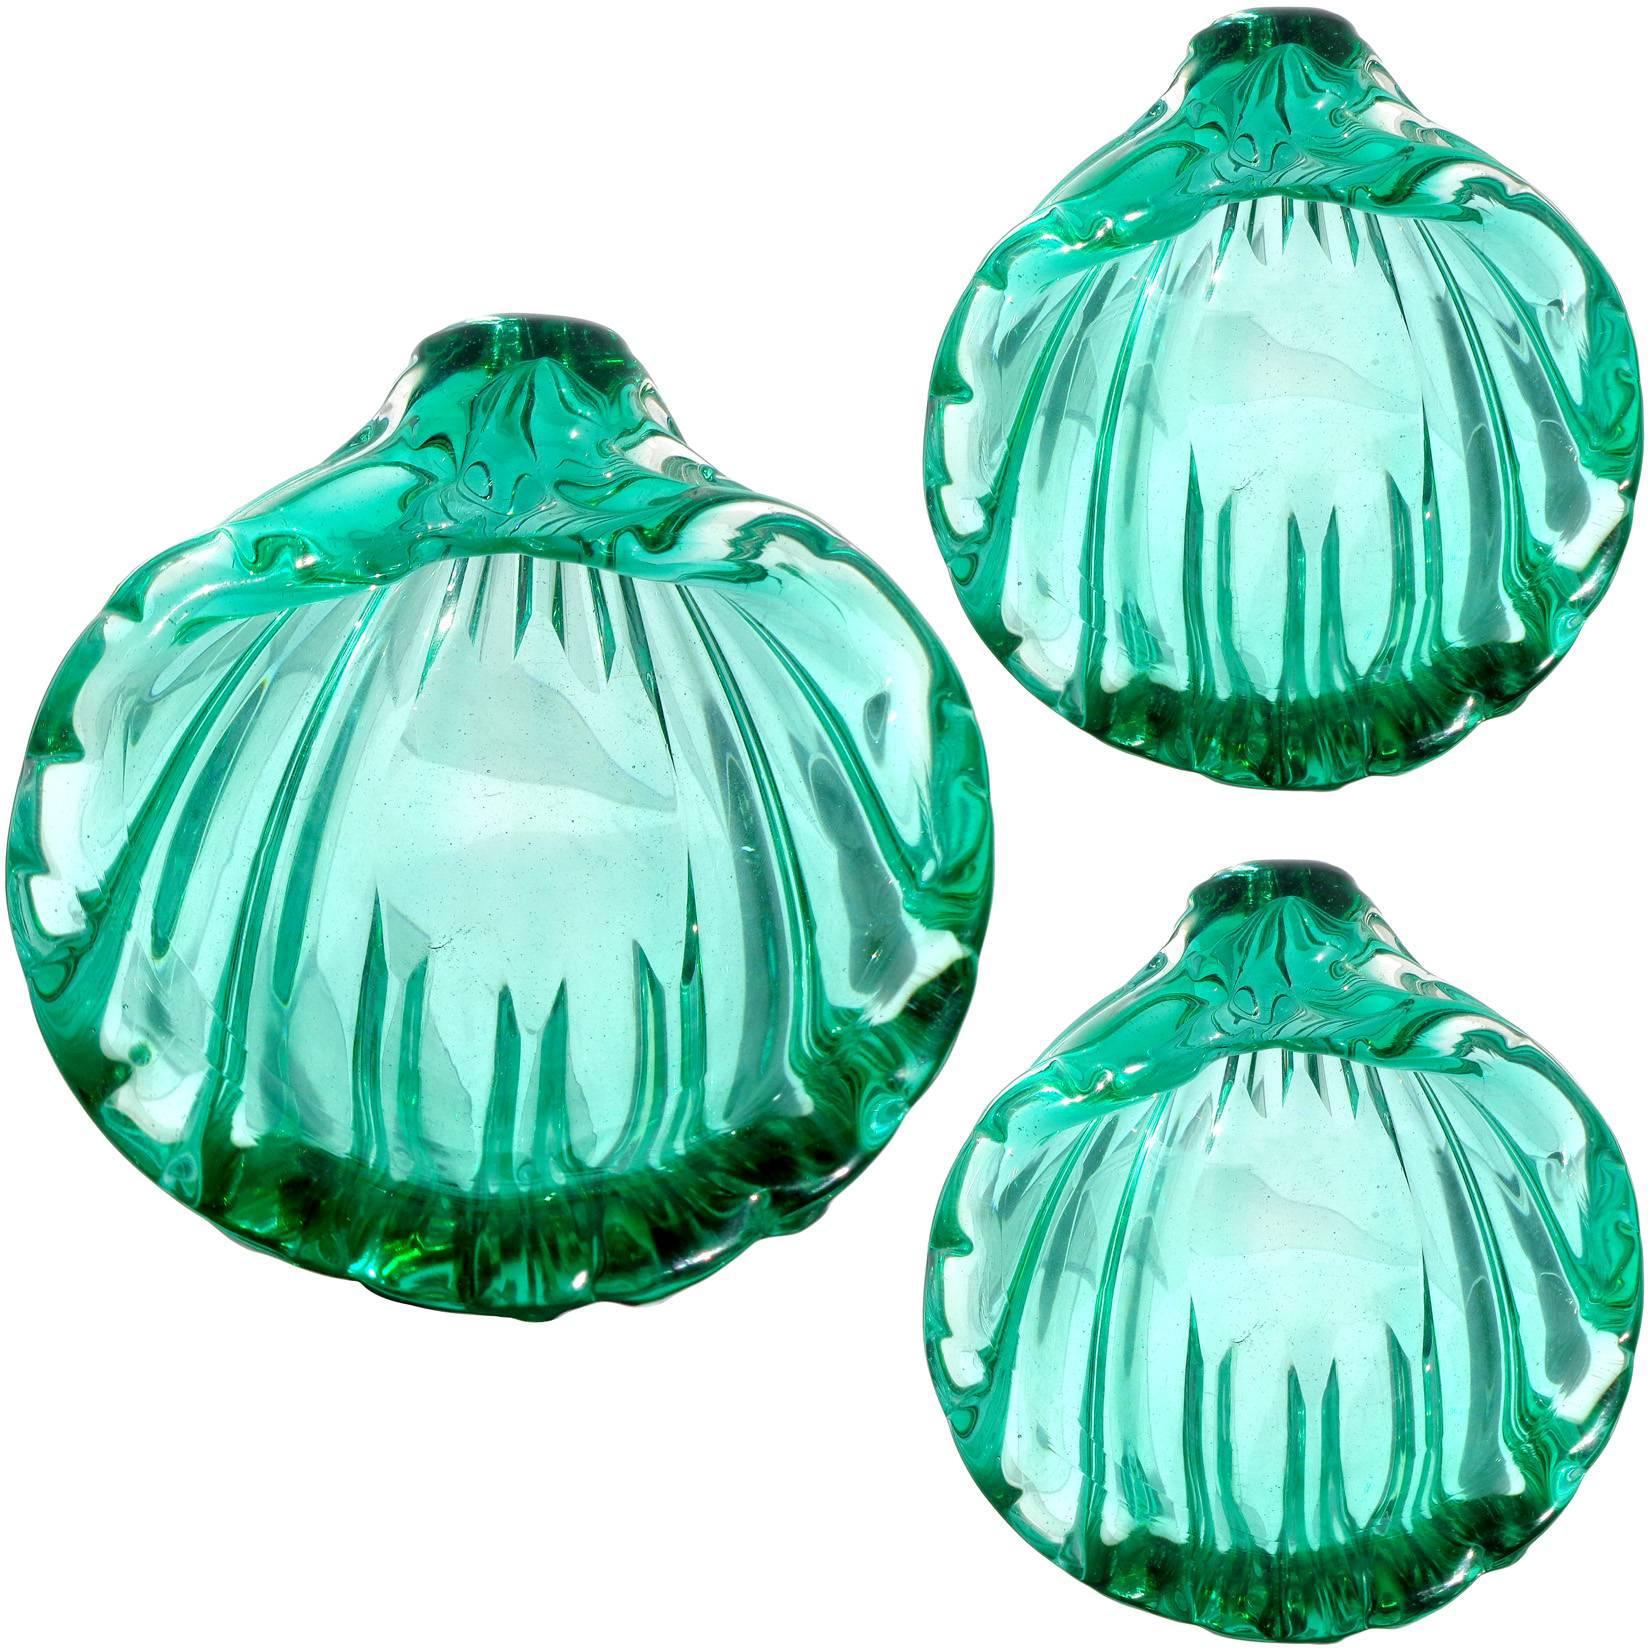 Hand-Crafted Seguso Murano Sommerso Green Italian Art Glass Sculptural Seashell Dishes, Salts For Sale